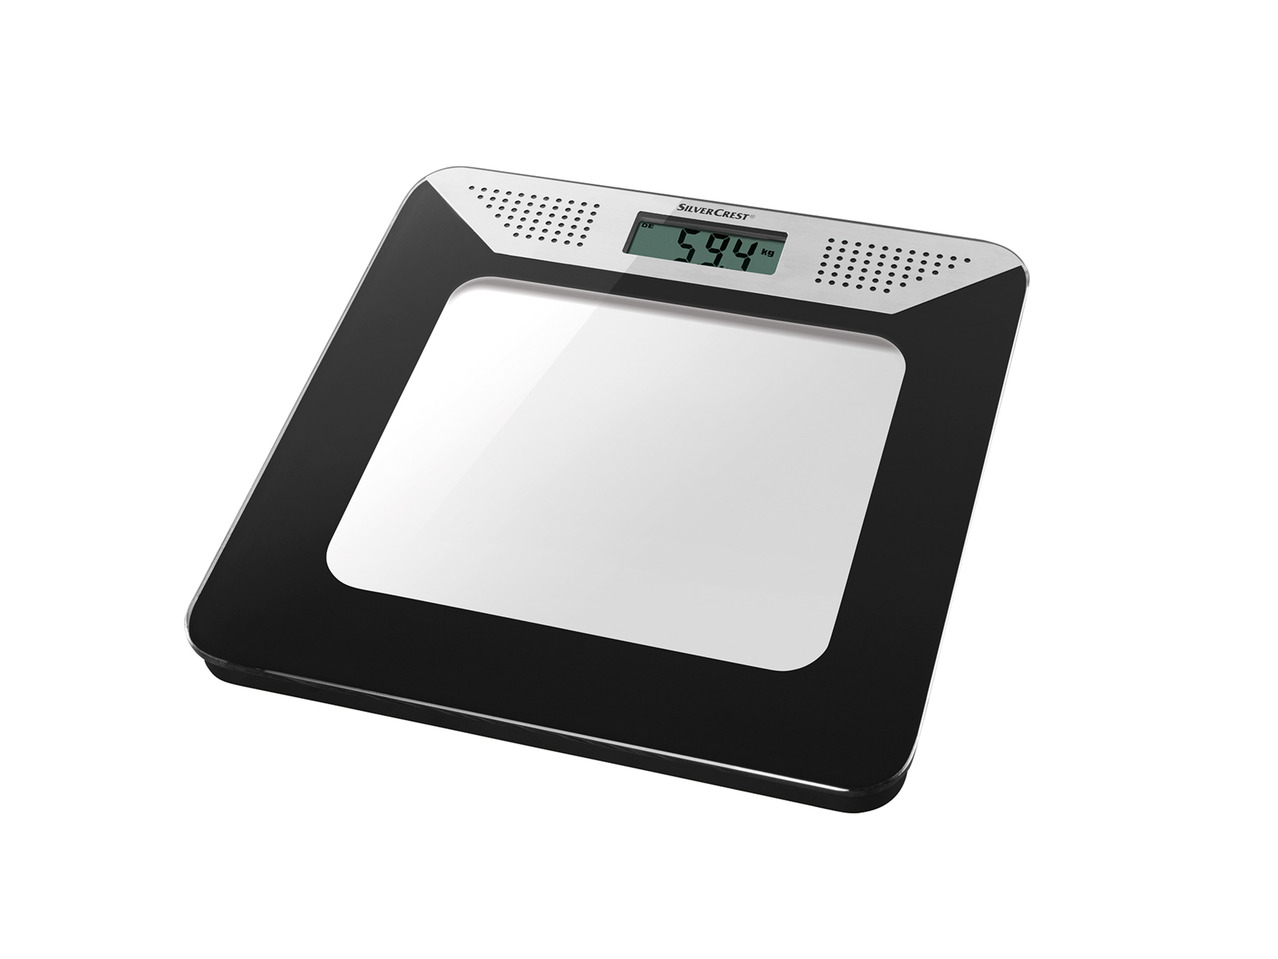 Silvercrest Personal Care Talking Scale1